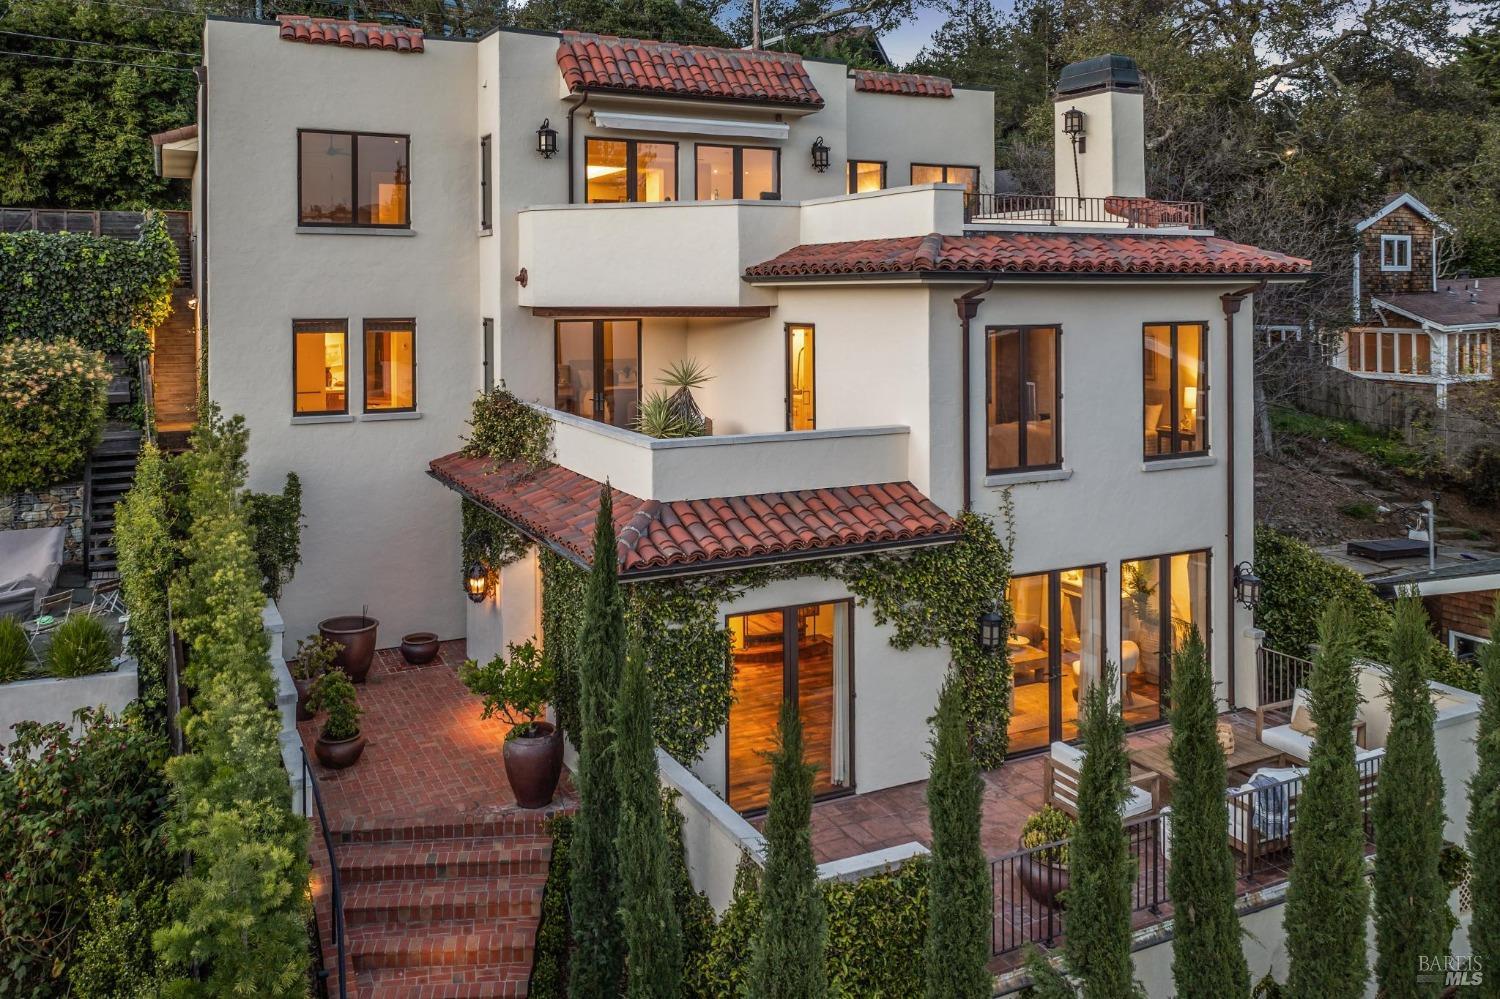 Photo of 75 Buena Vista Ave in Mill Valley, CA